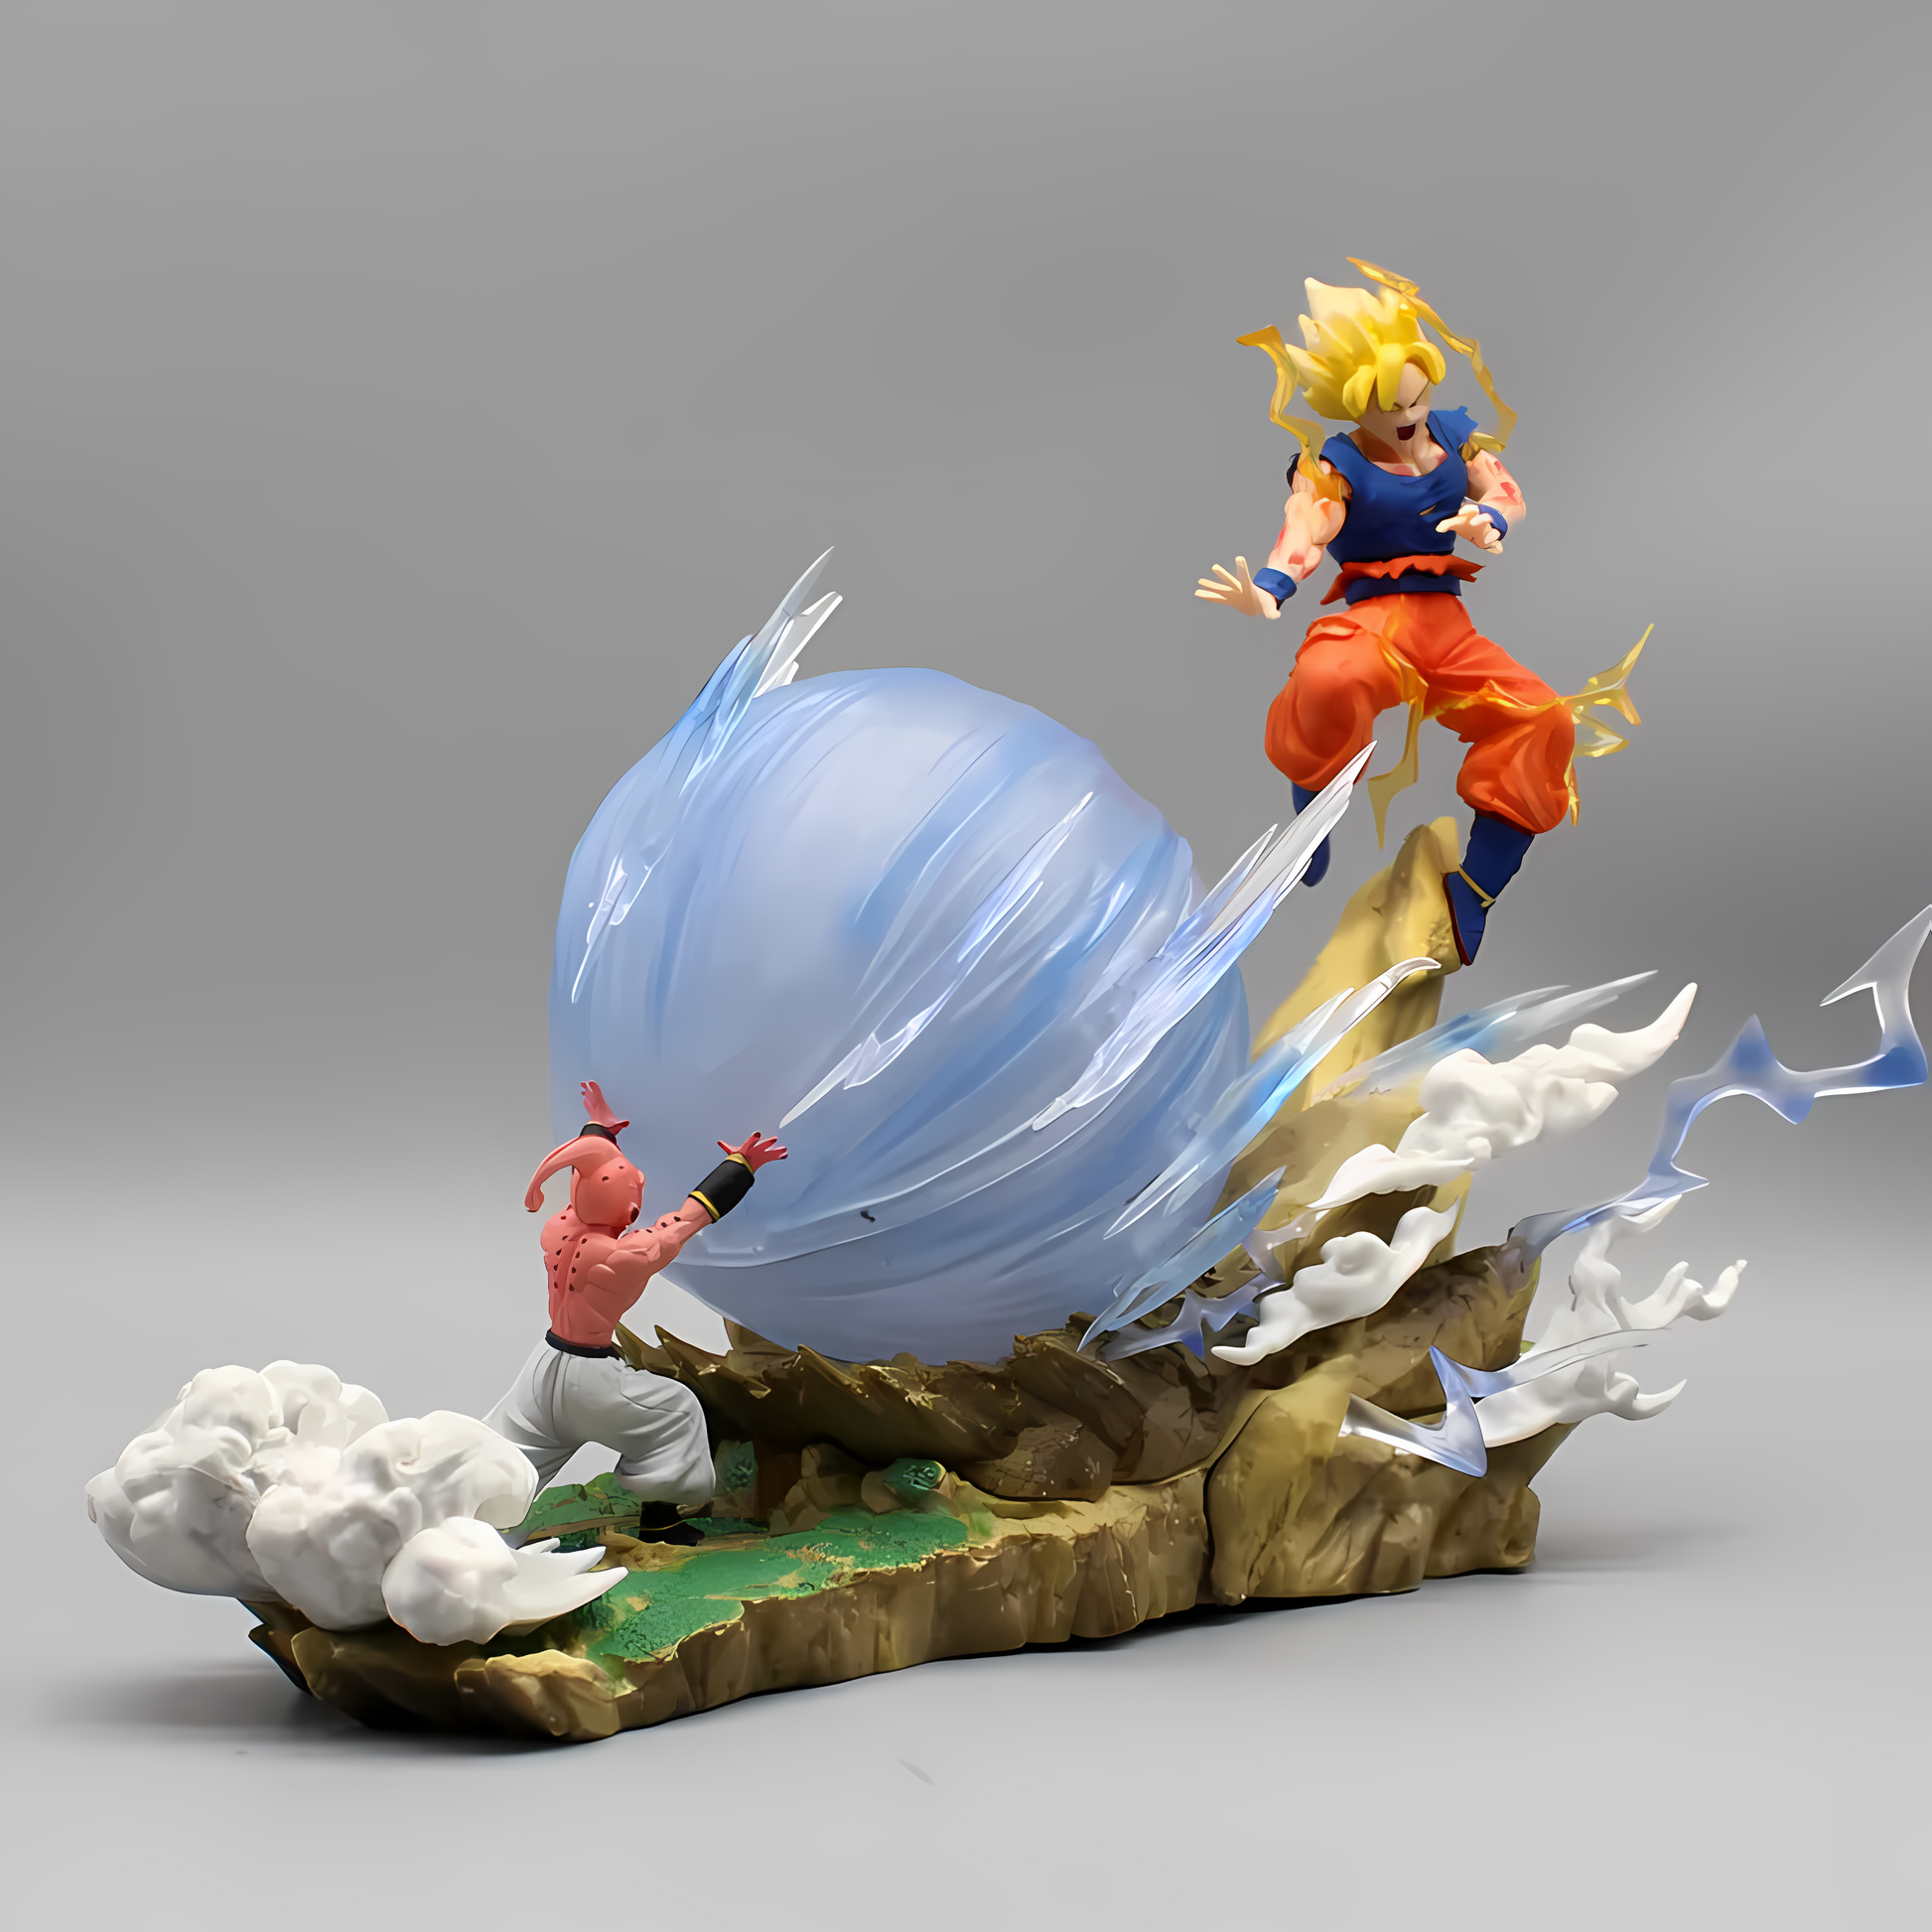 Dramatic side angle of Goku soaring over Buu's energy blast, highlighting the dynamic movement and fierce expressions of the Dragon Ball characters."